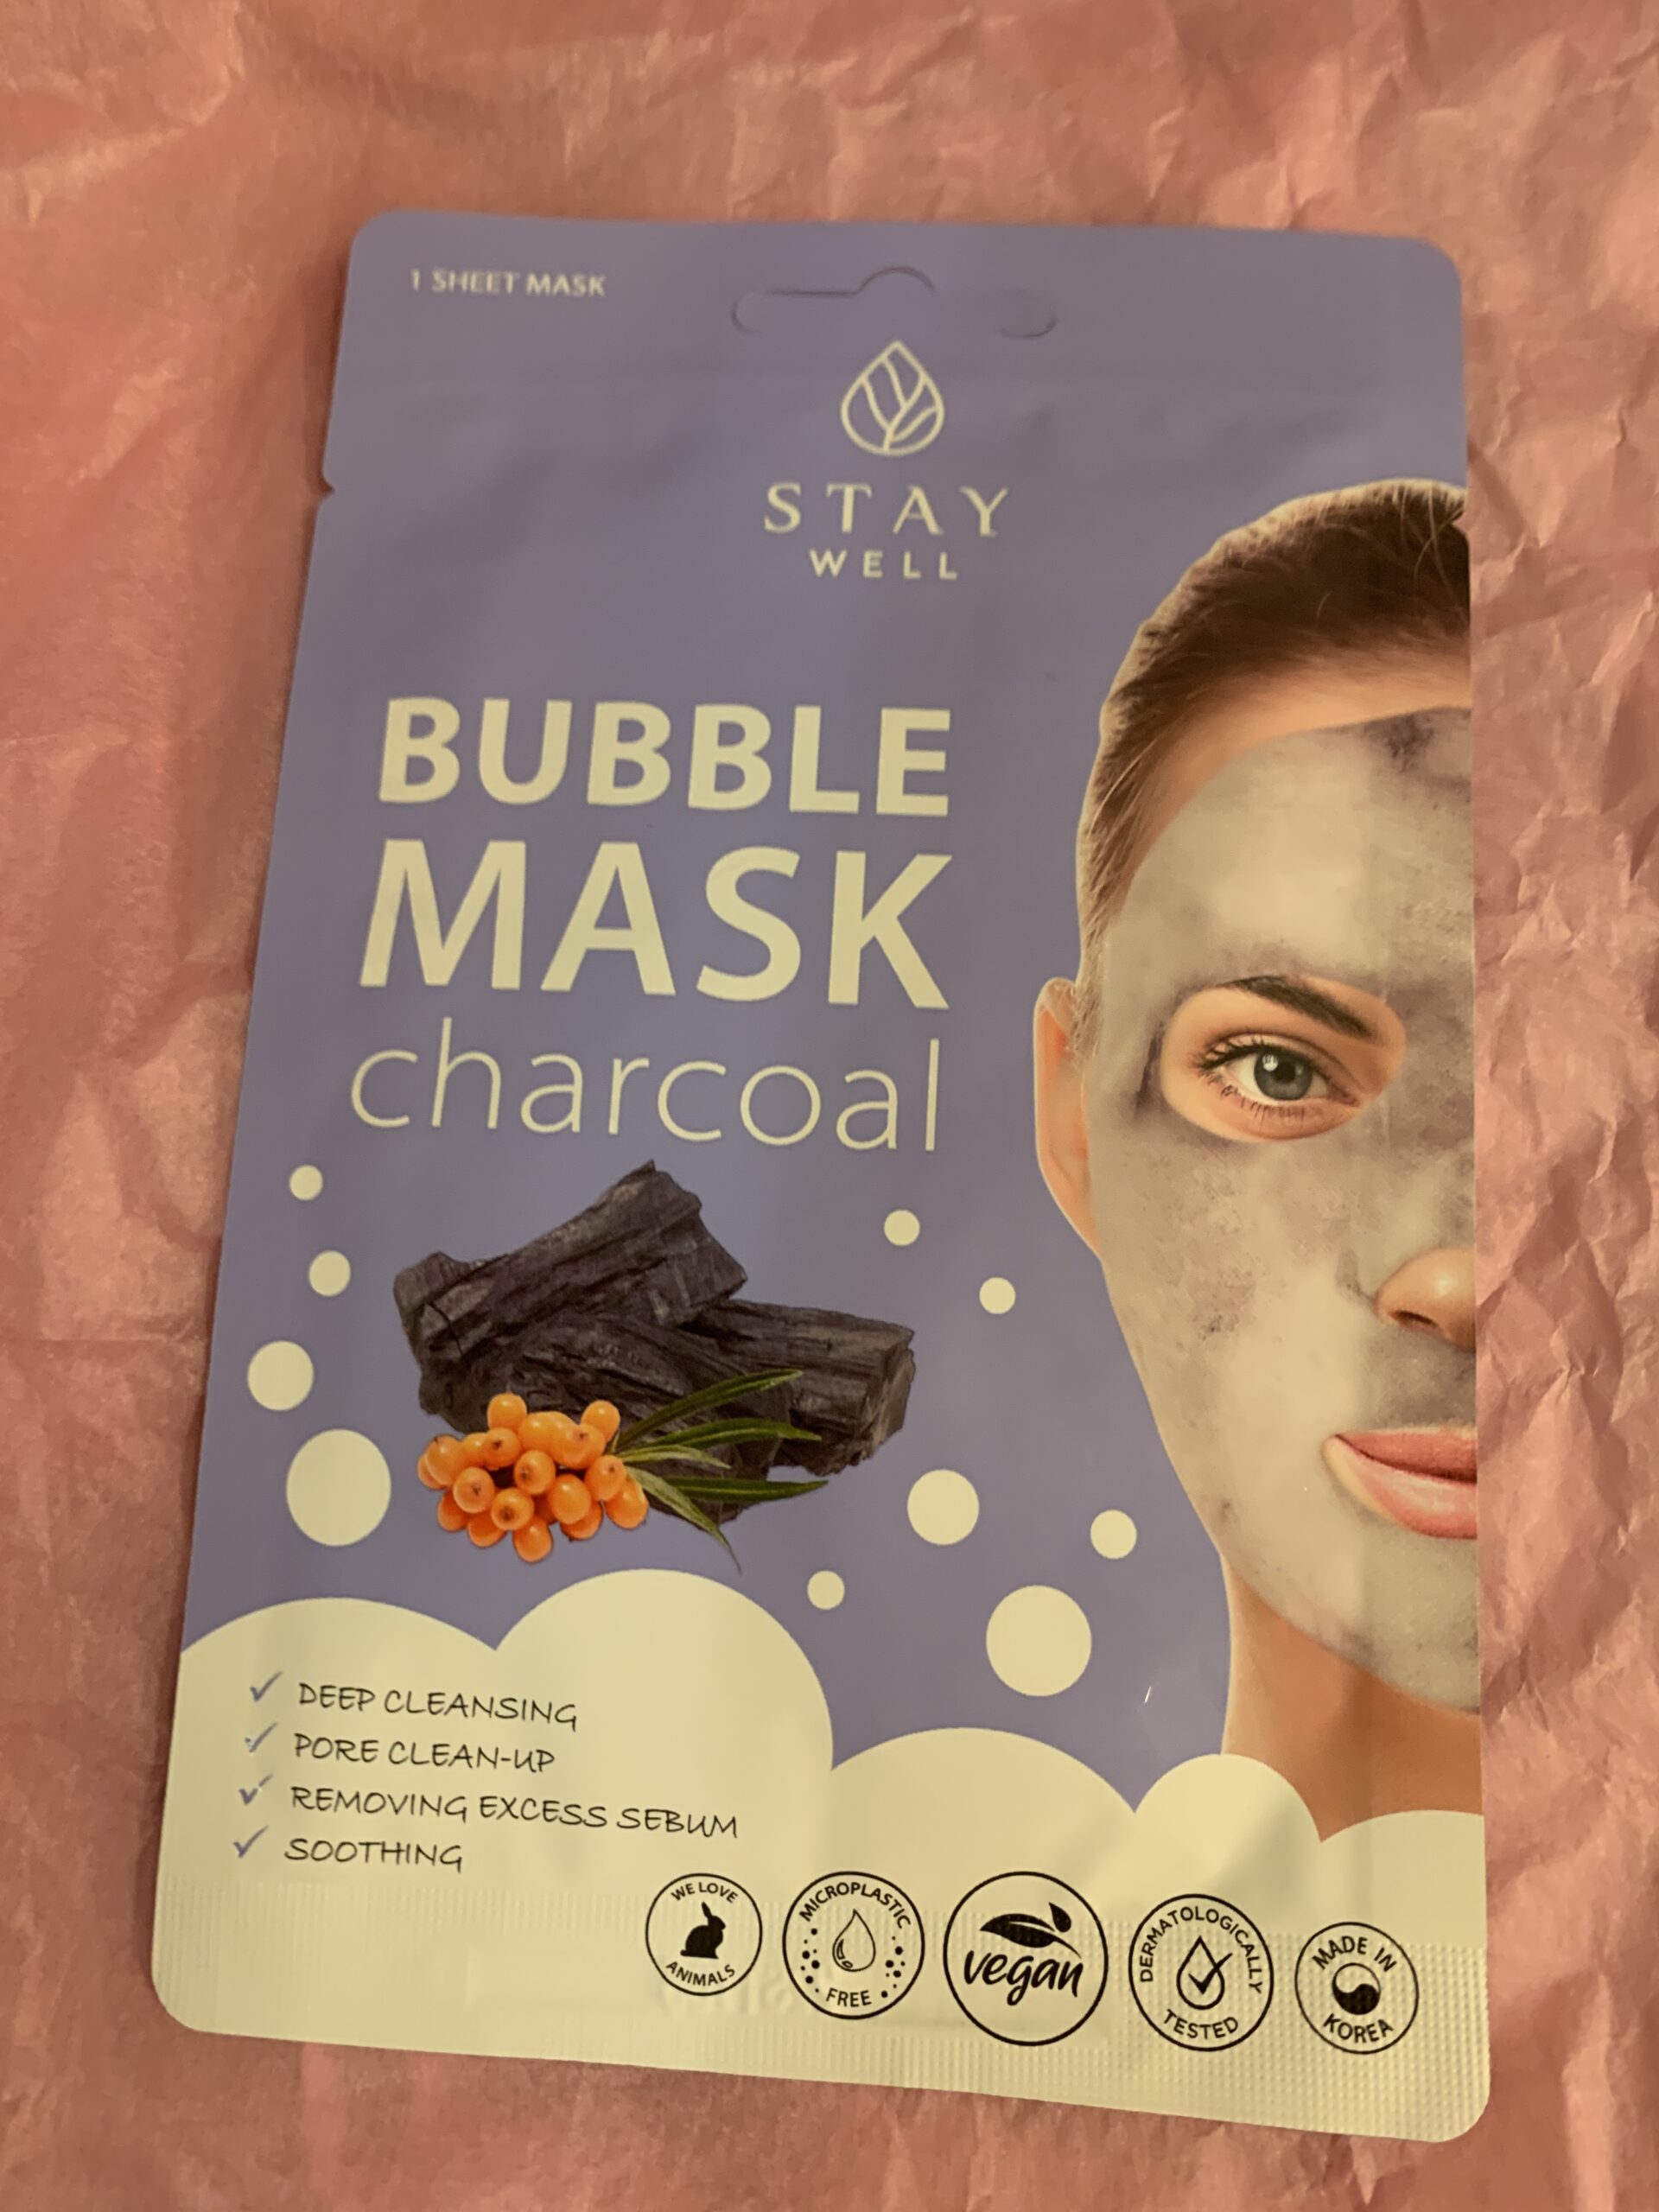 Stay Well bubble mask charcoal